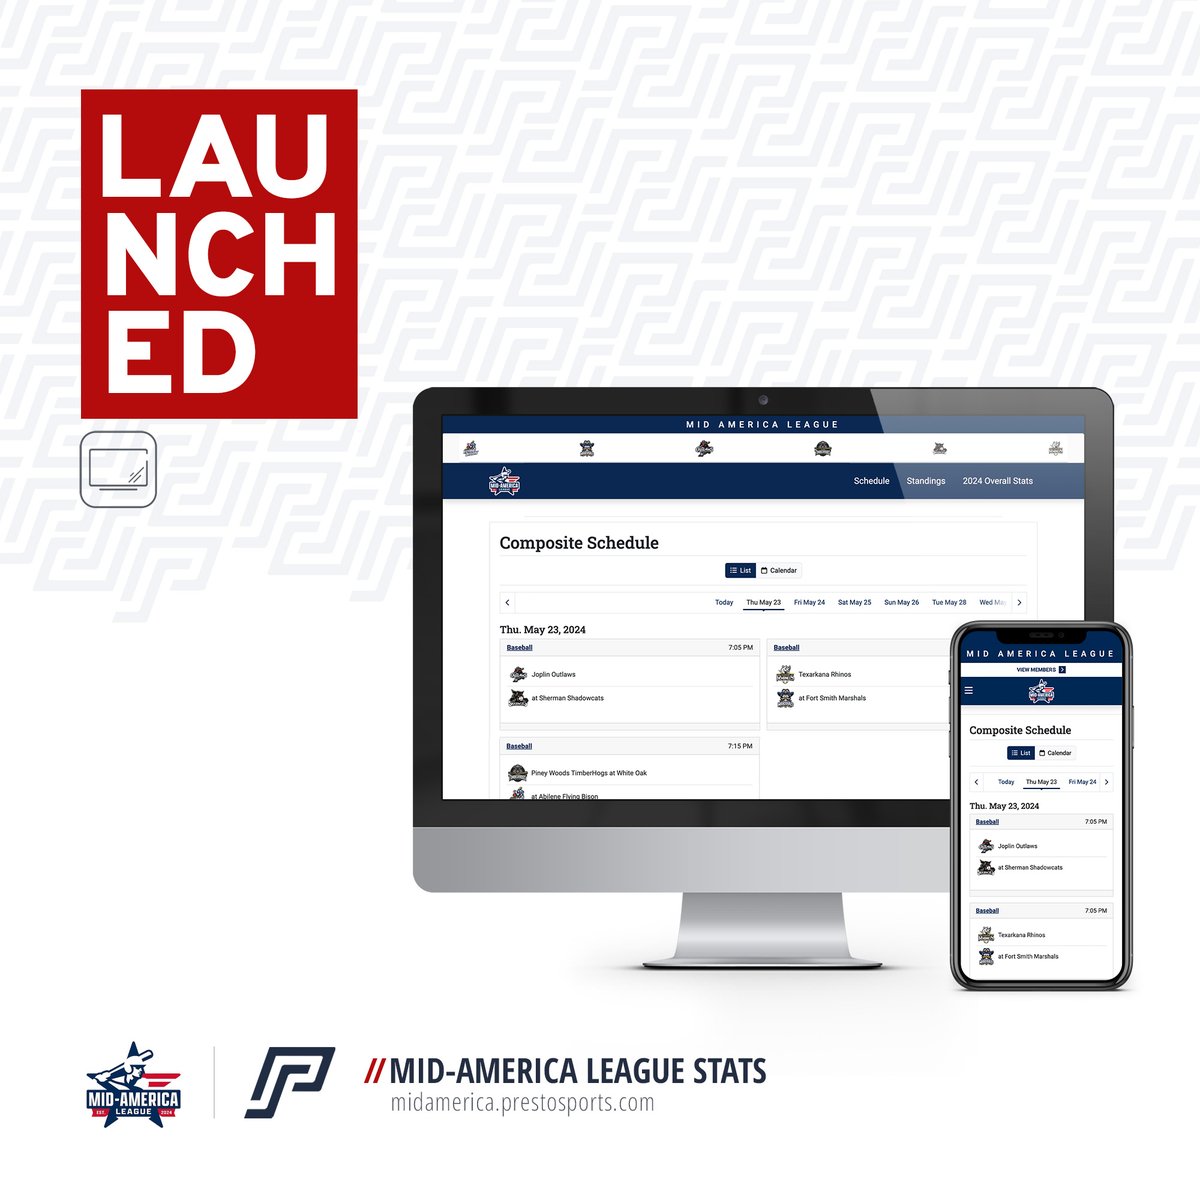 🚀 Launched! Check out the new stats site for the @MidAmeriLeague at midamerica.prestosports.com.